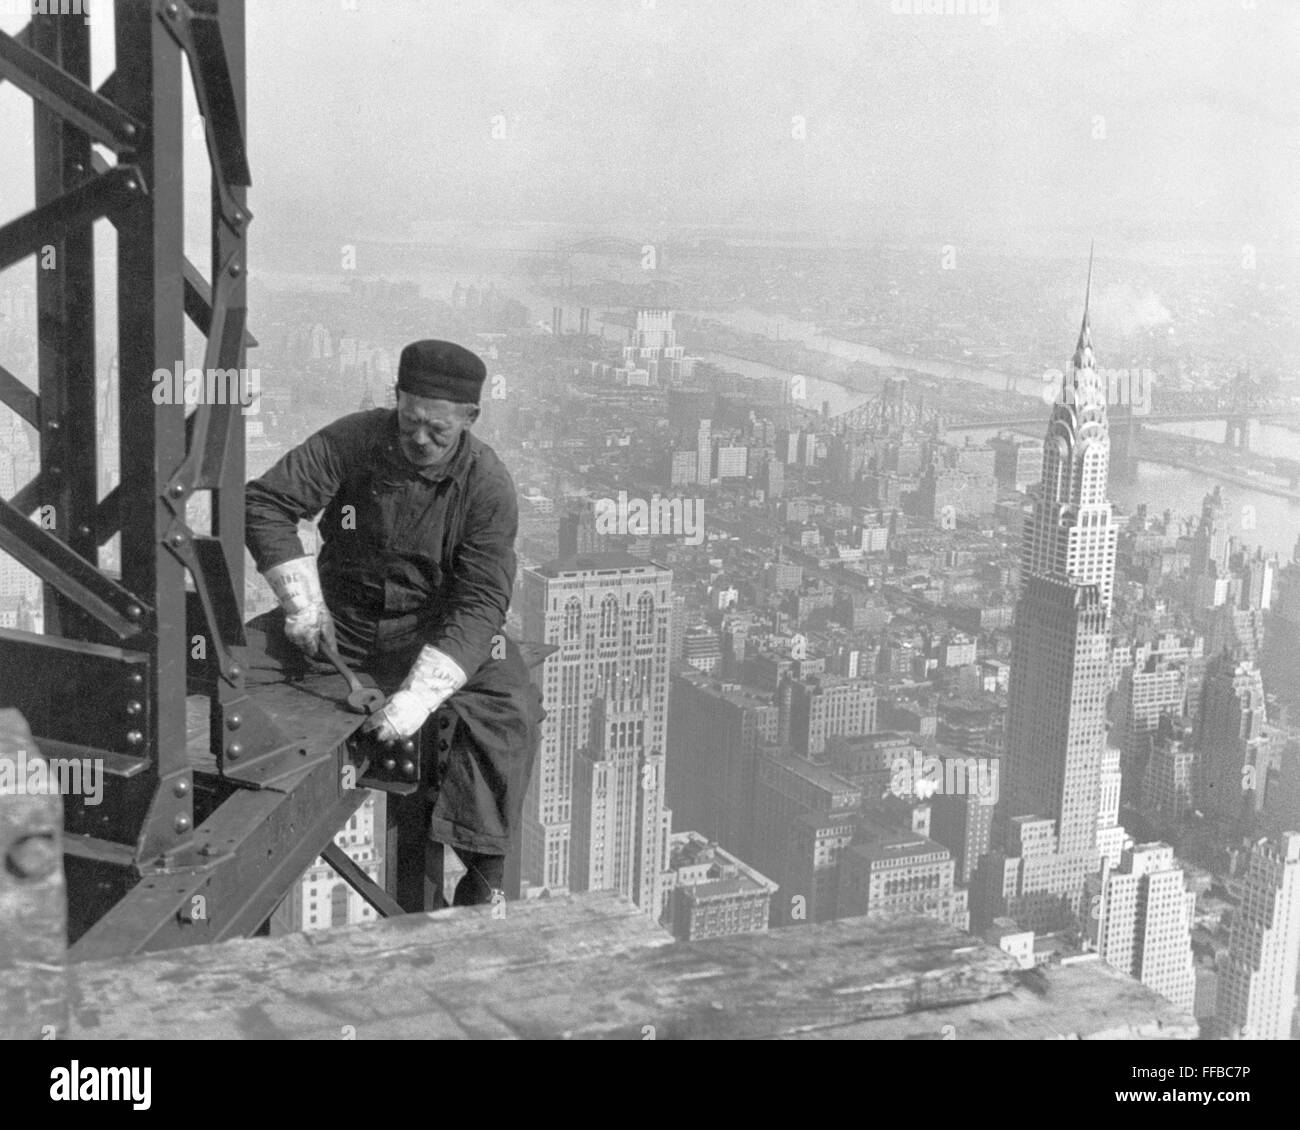 Old-timer, keeping up with the young boys. Many structural workers are above middle-age working on the Empire State Building. Circa 1930. Photograph by By Lewis Hine.      This archival print is available in the following sizes:    8' x 10'   $15.95 w/ FREE SHIPPING  11' x 14' $23.95 w/ FREE SHIPPING  16' x 20' $59.95 w/ FREE SHIPPING  20' x 24' $99.95 w/ FREE SHIPPING    * The American Photoarchive watermark will not appear on your print. Stock Photo